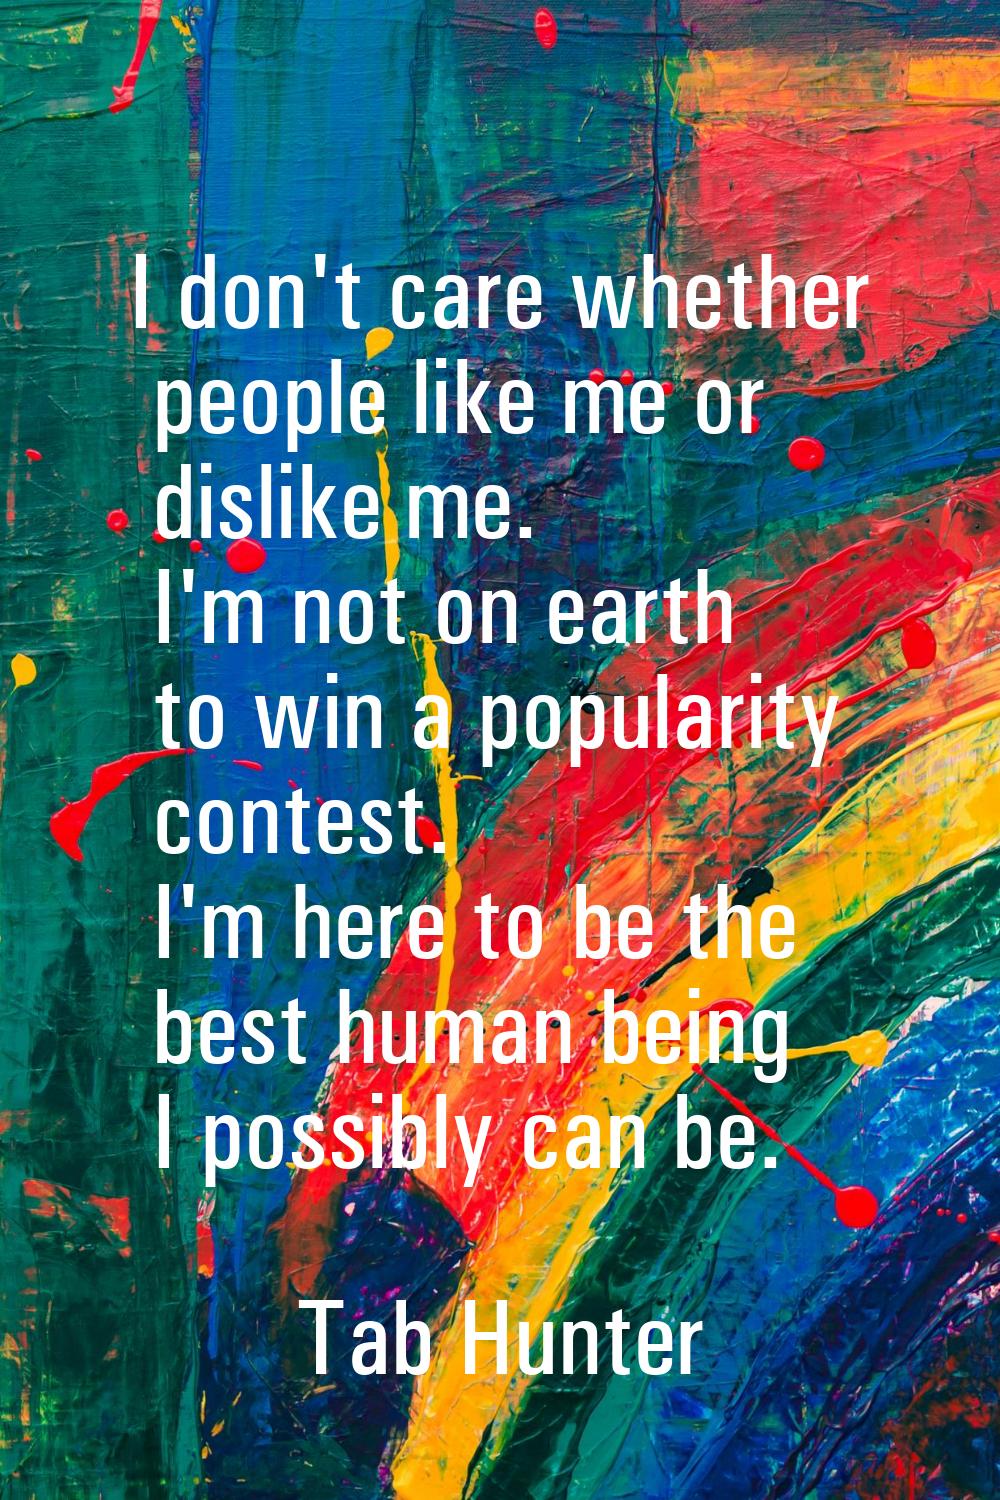 I don't care whether people like me or dislike me. I'm not on earth to win a popularity contest. I'